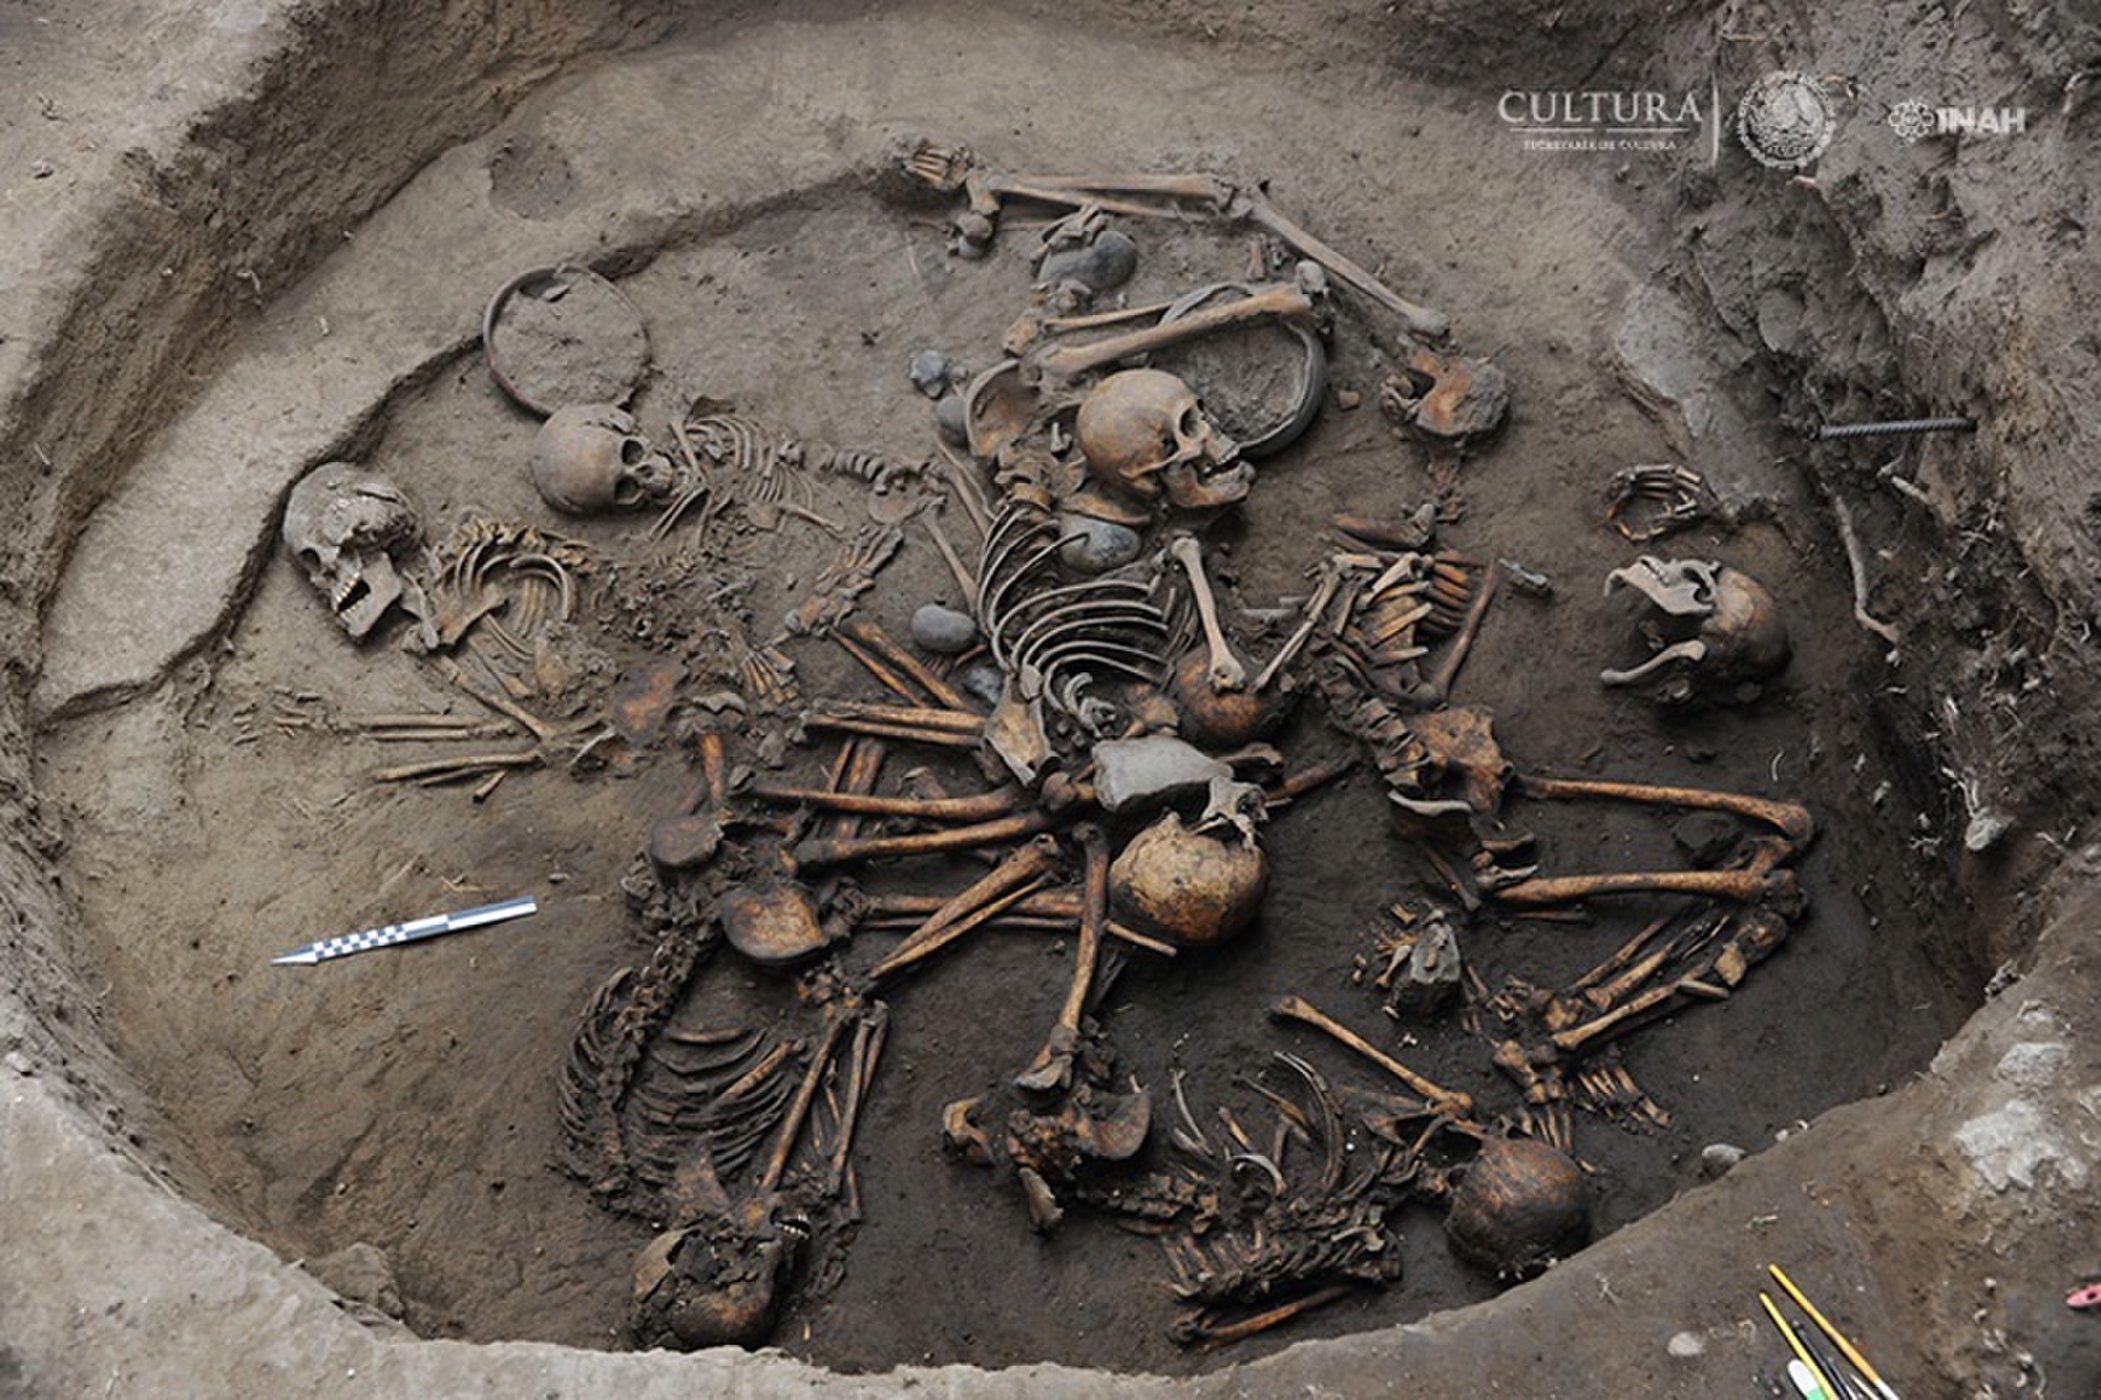 Unusual 2,400-Year-Old Burial Unearthed in Mexico City - Archaeology Magazine